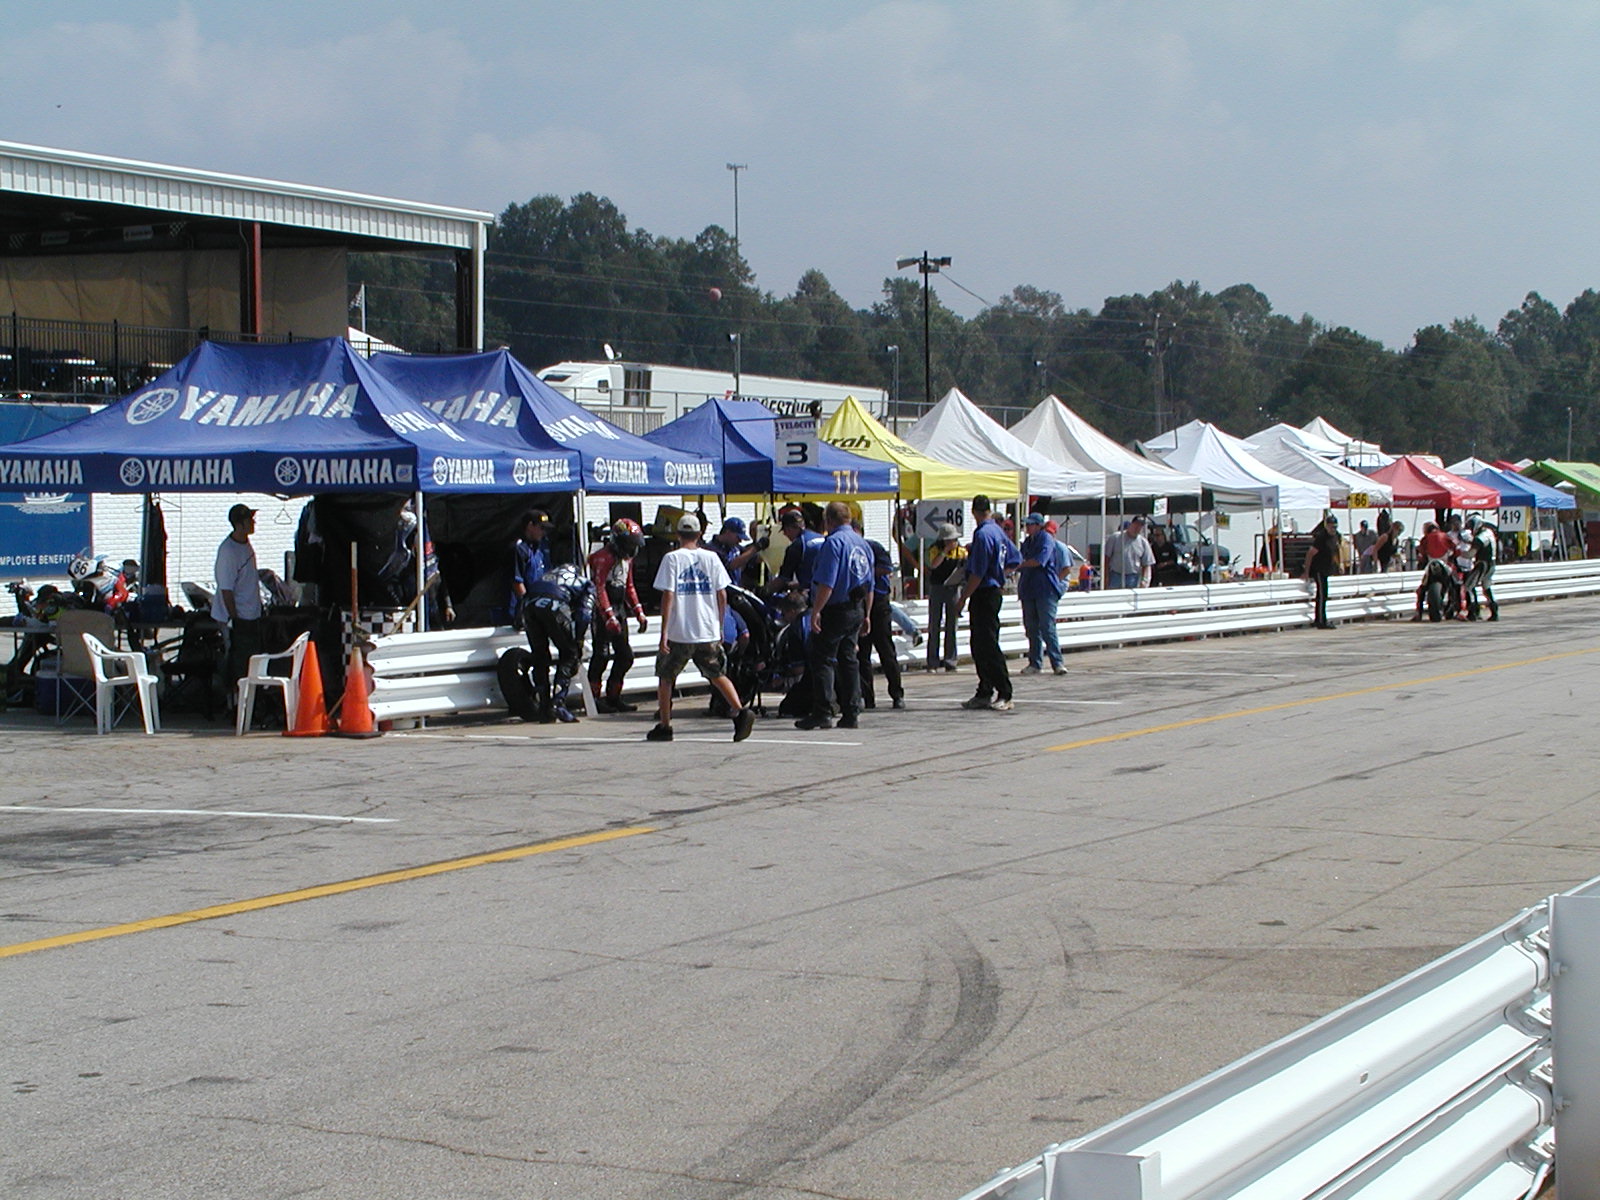 several tents set up on the side of a race track